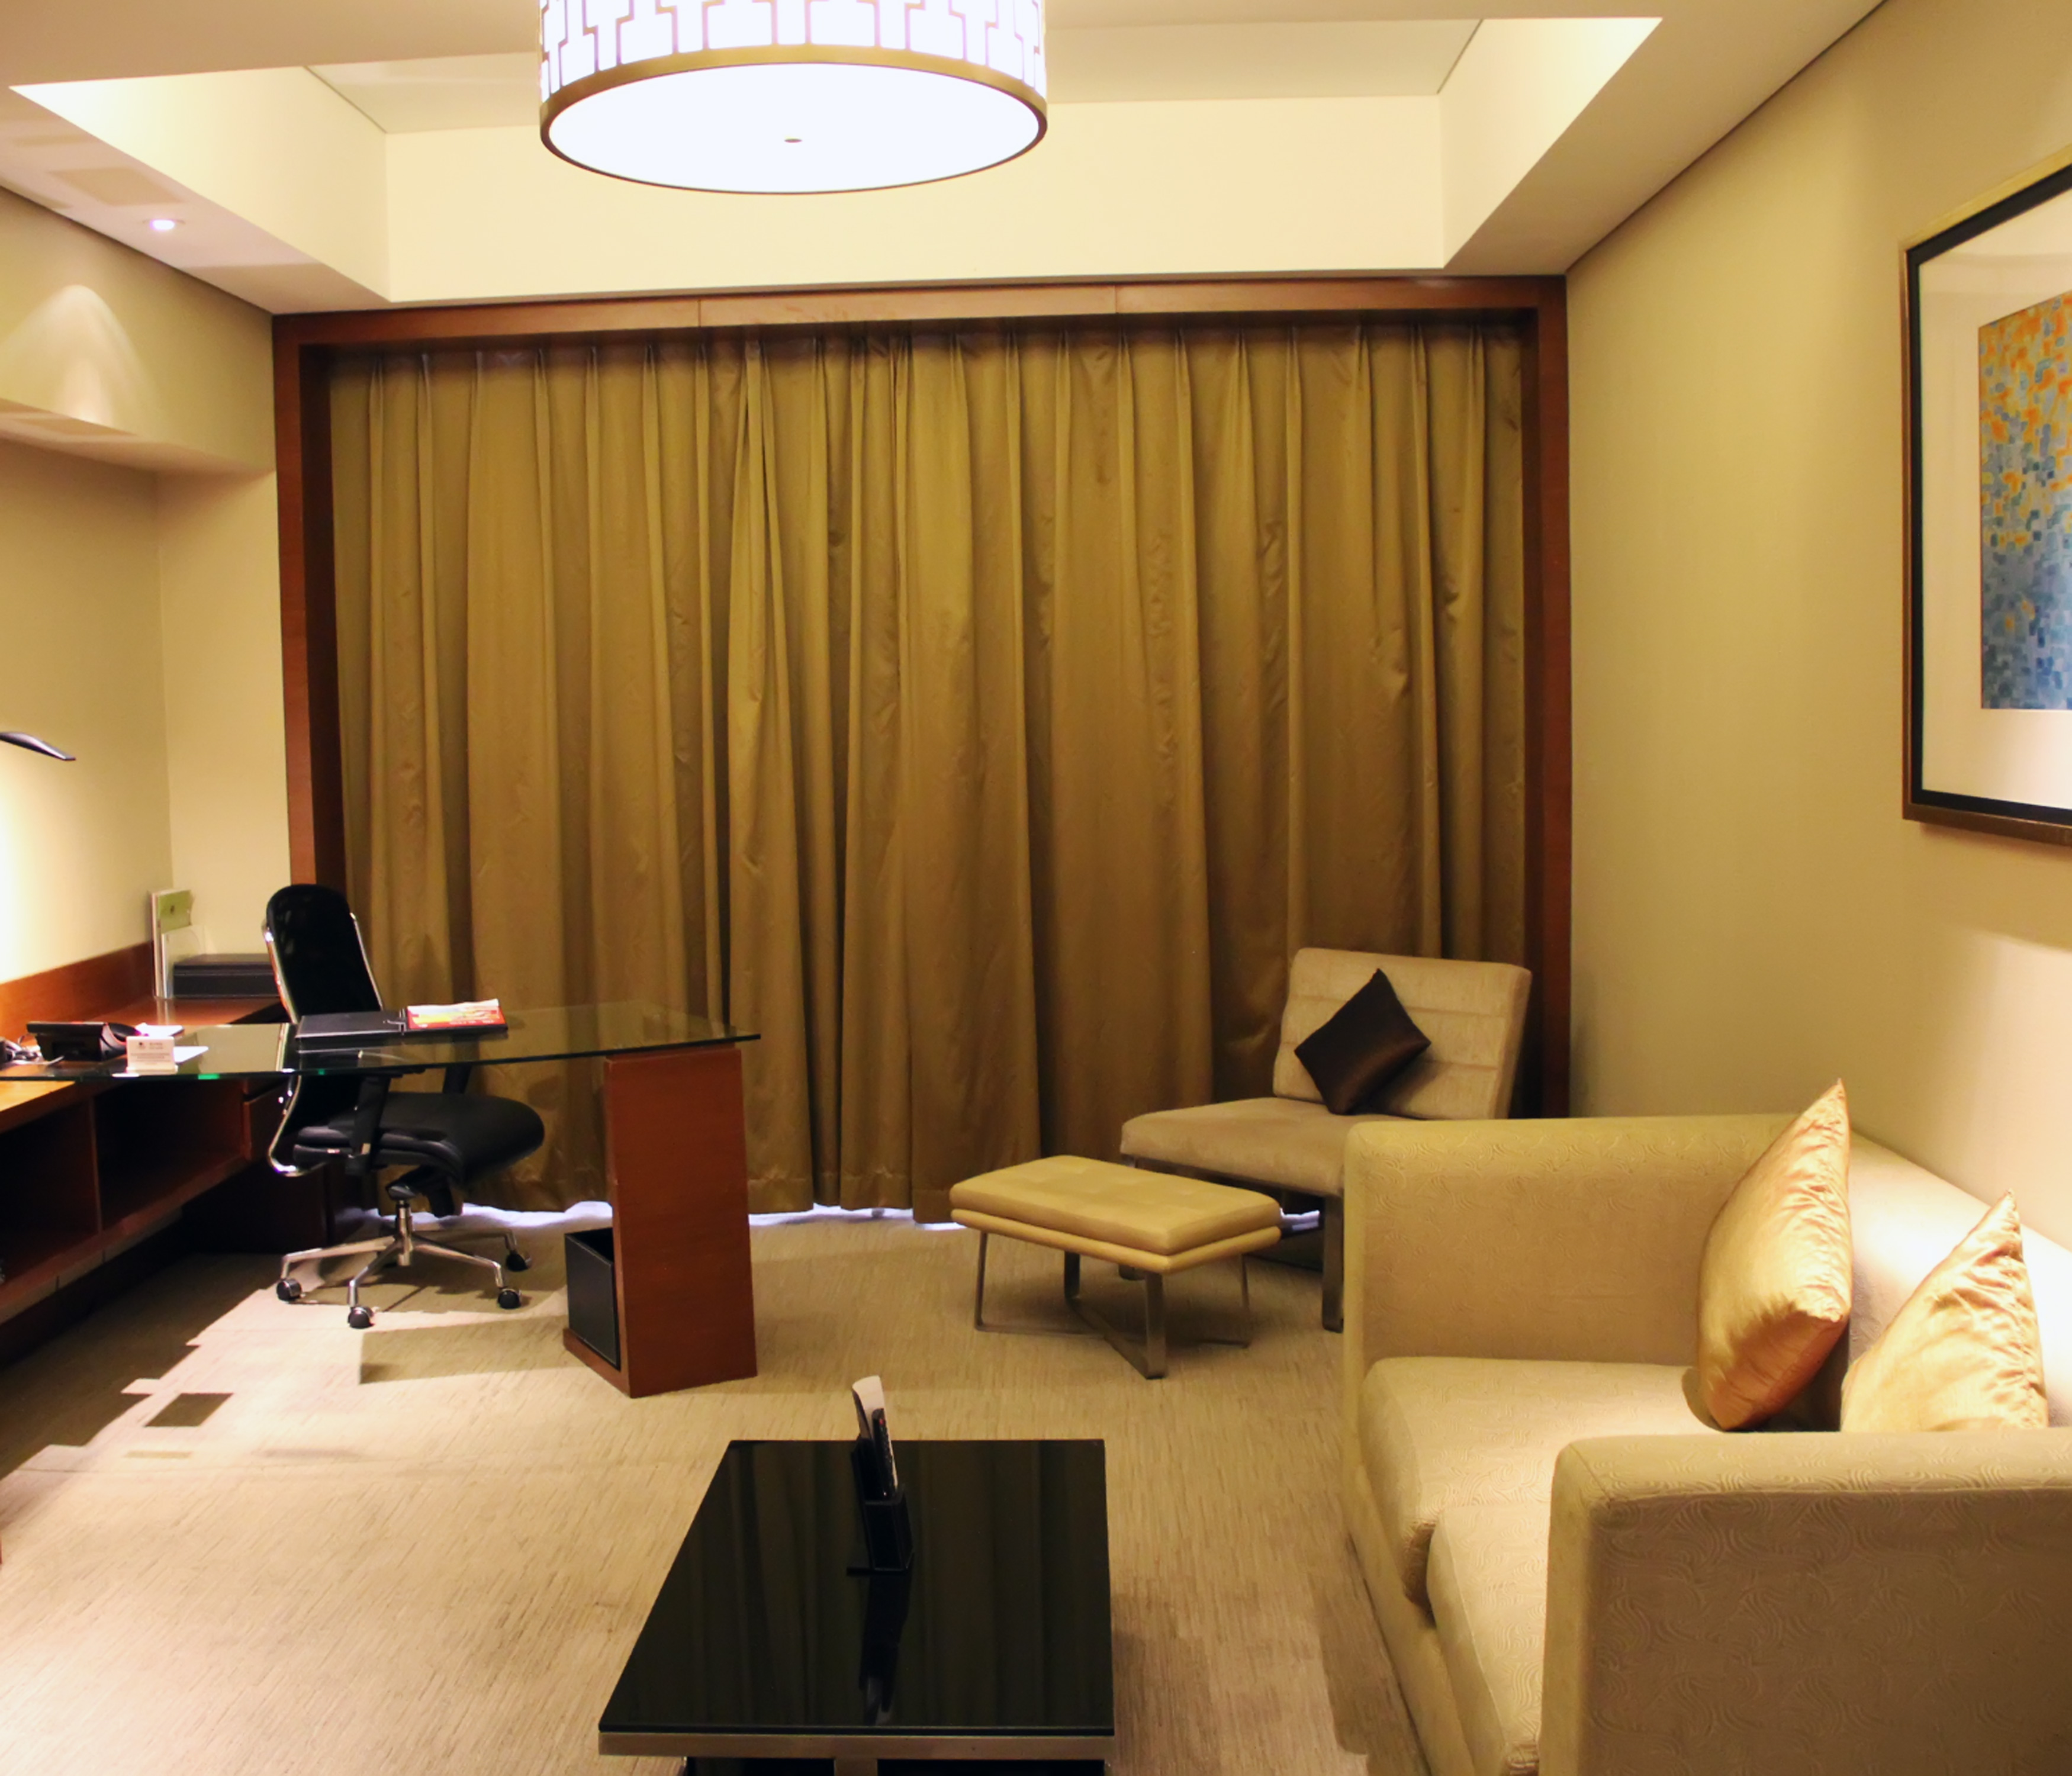 Superior suite living room with sofa, soft chair, ottoman, coffee table, and work desk